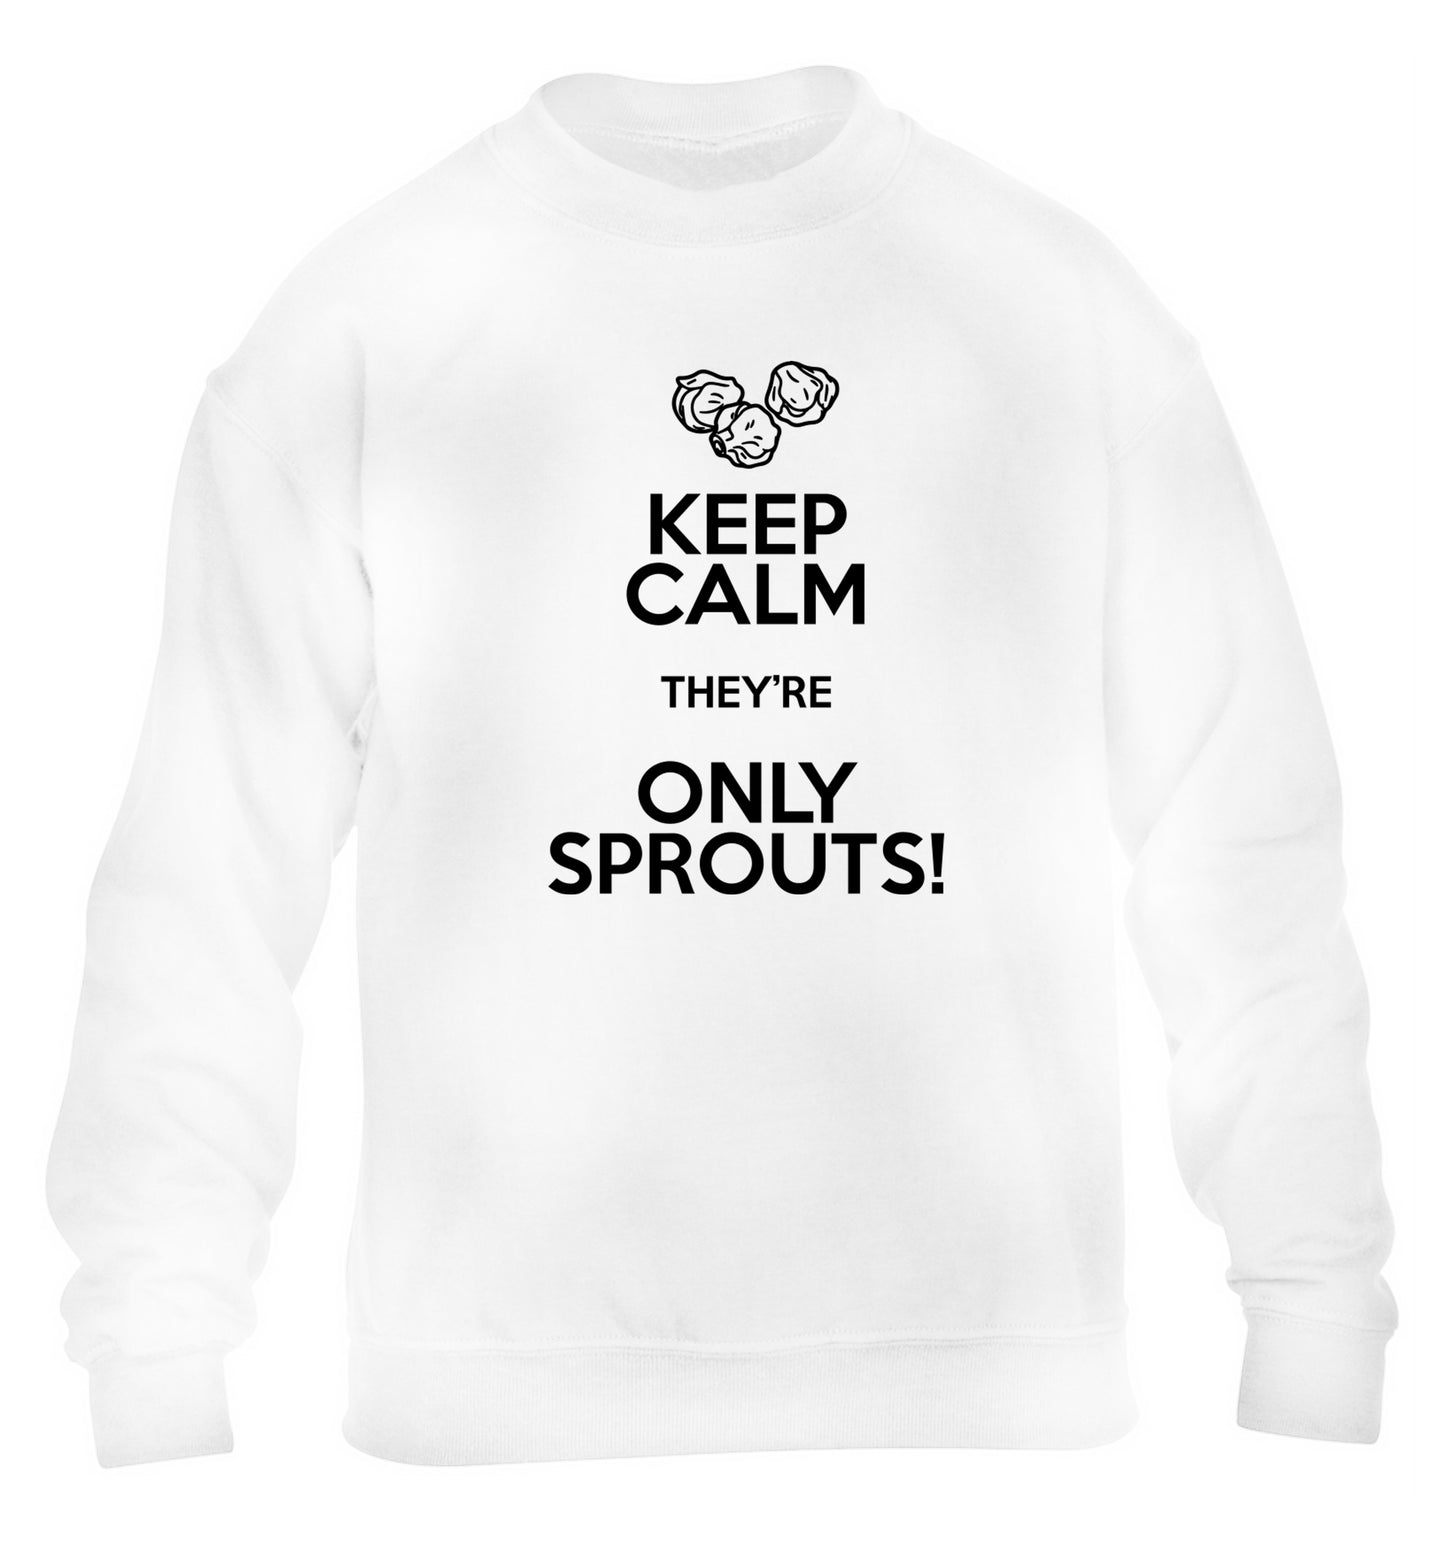 Keep calm they're only sprouts children's white sweater 12-13 Years